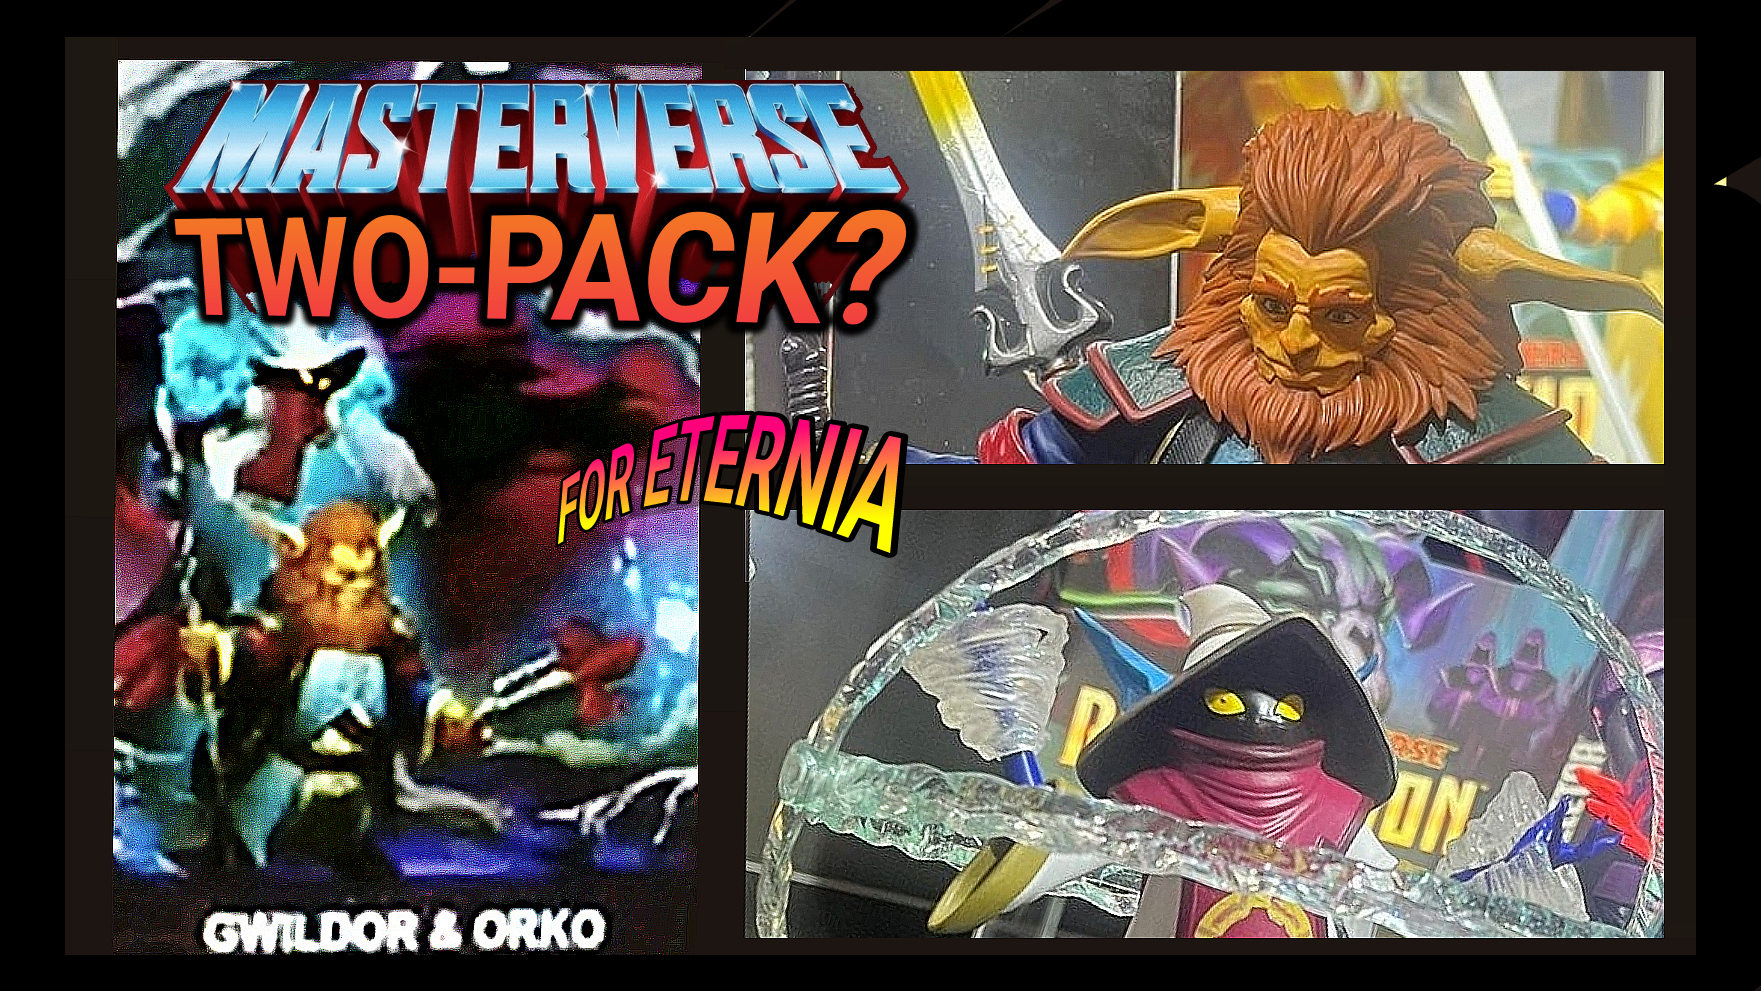 It appears MASTERVERSE Gwildor & Orko (Reborn) will be a 2-PACK